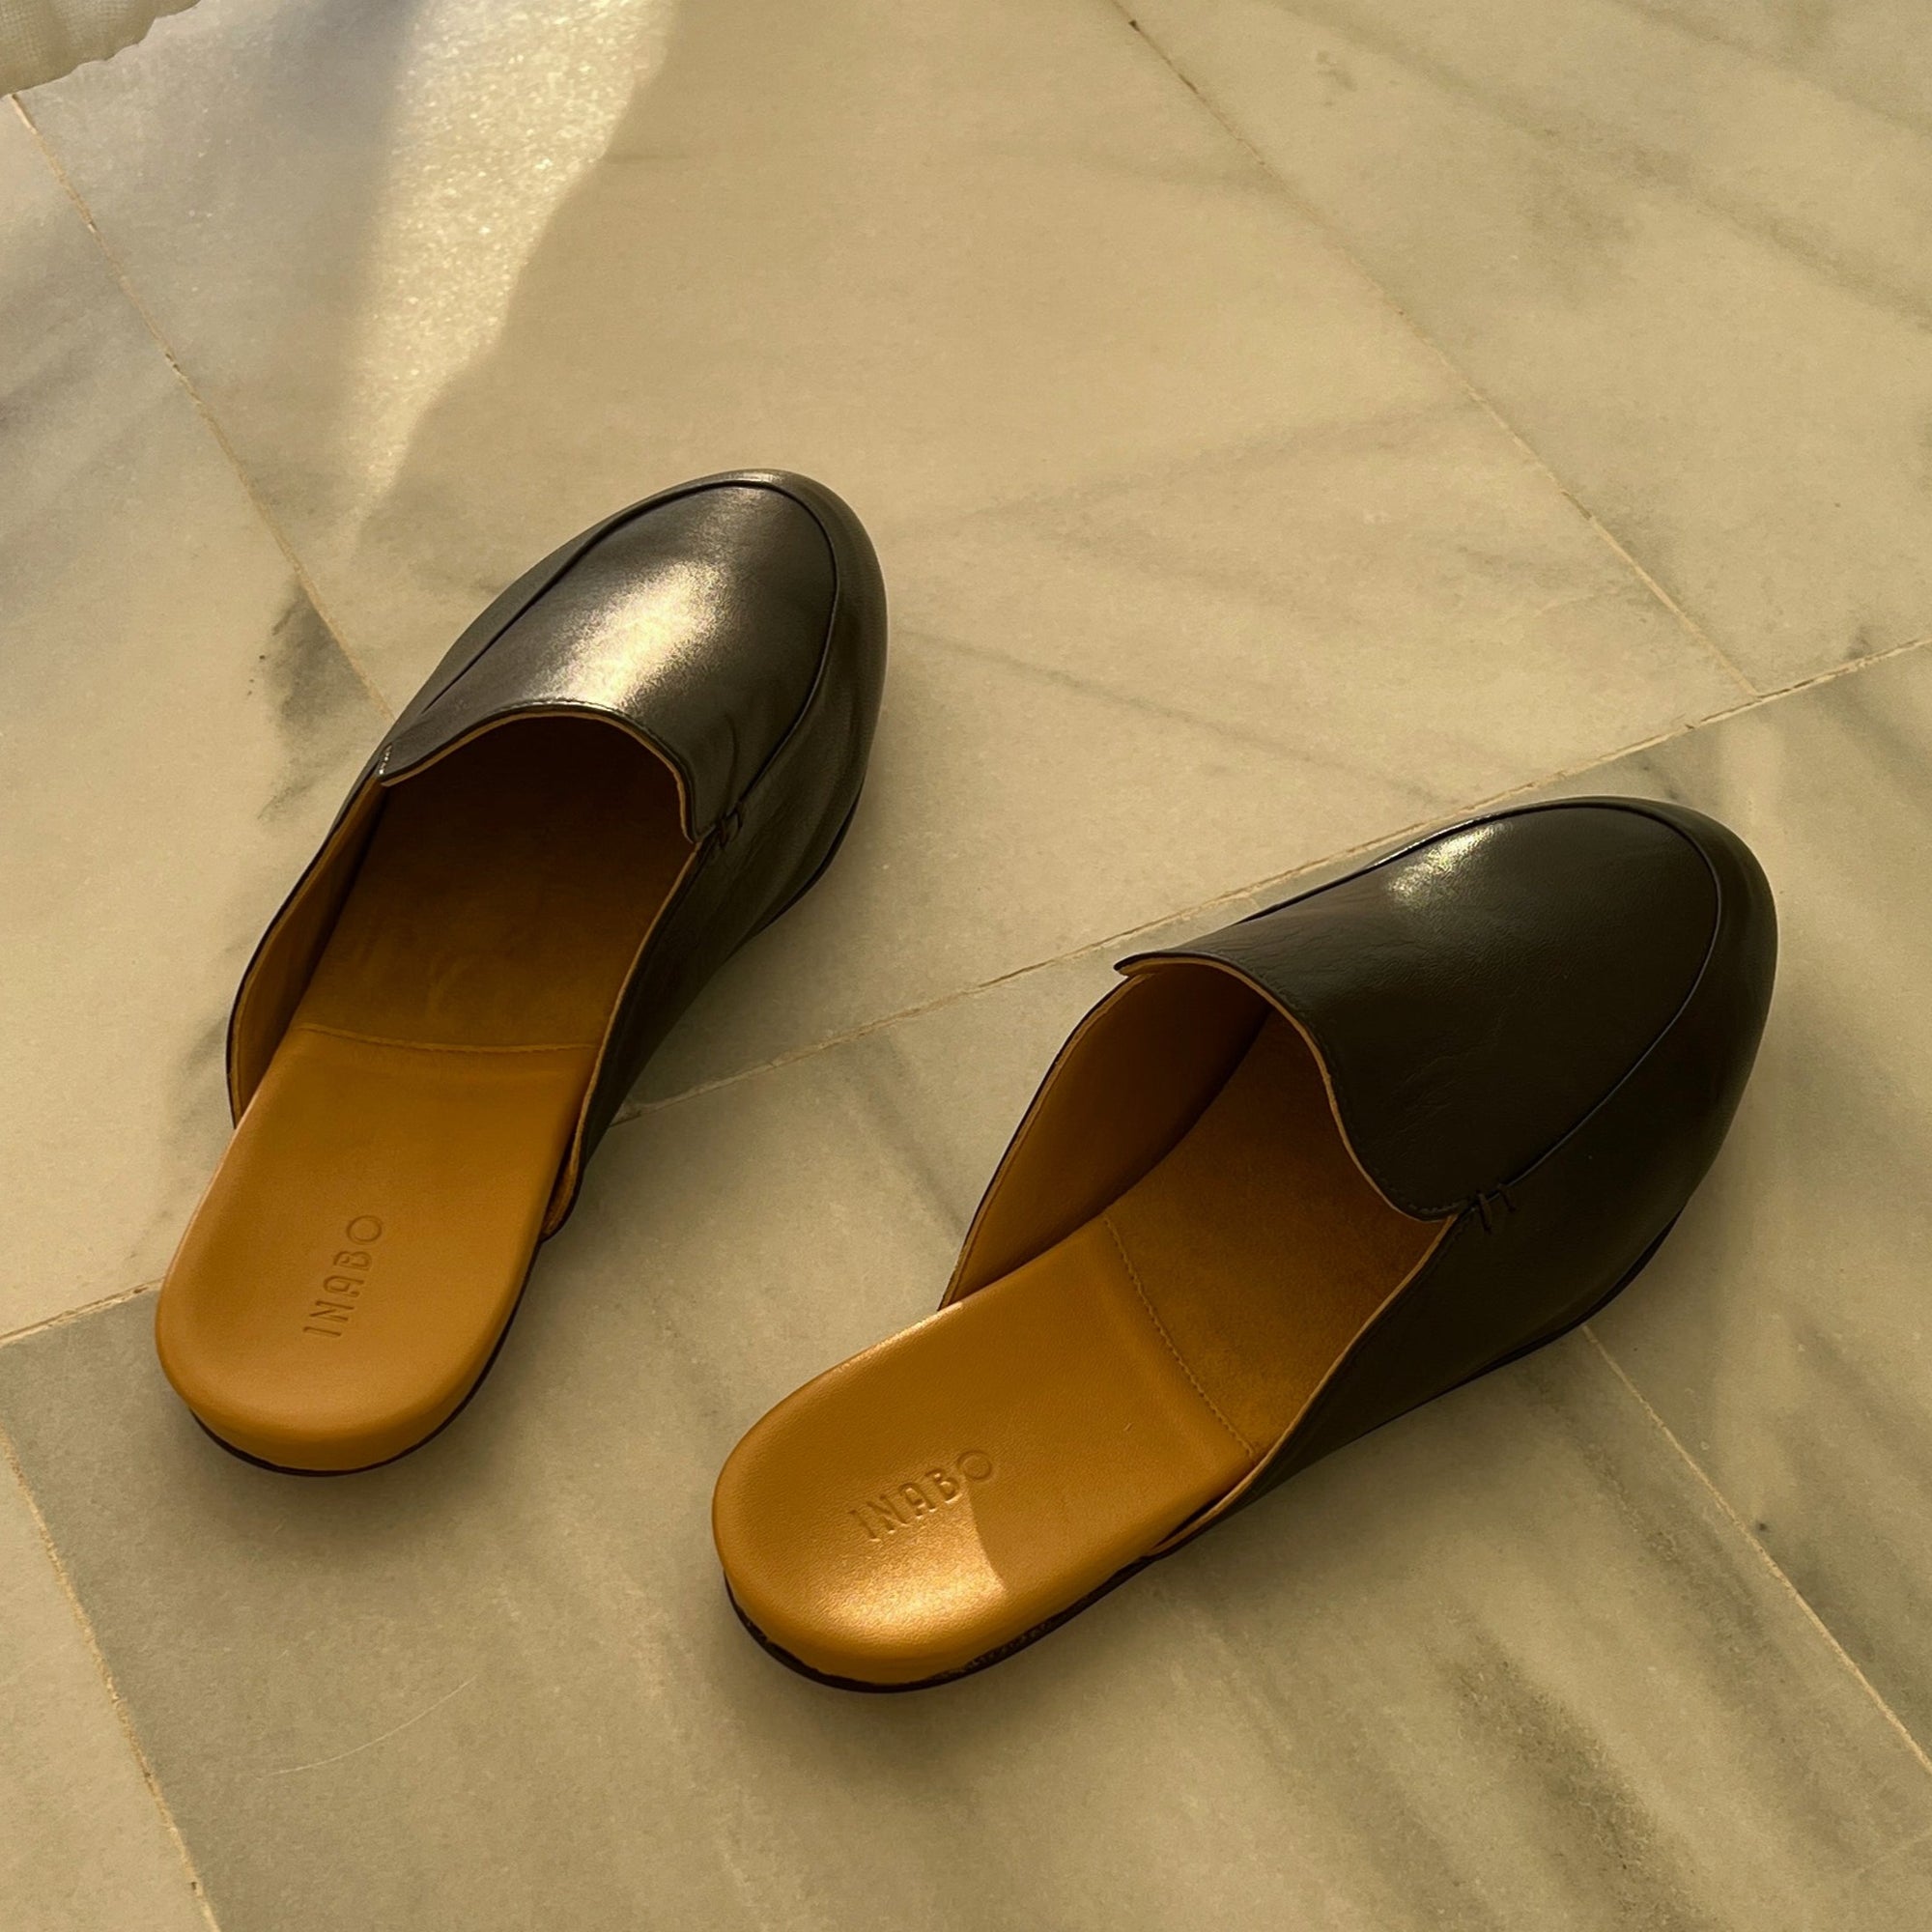 Dark brown leather slippers from Inabo with a yellow leather insole